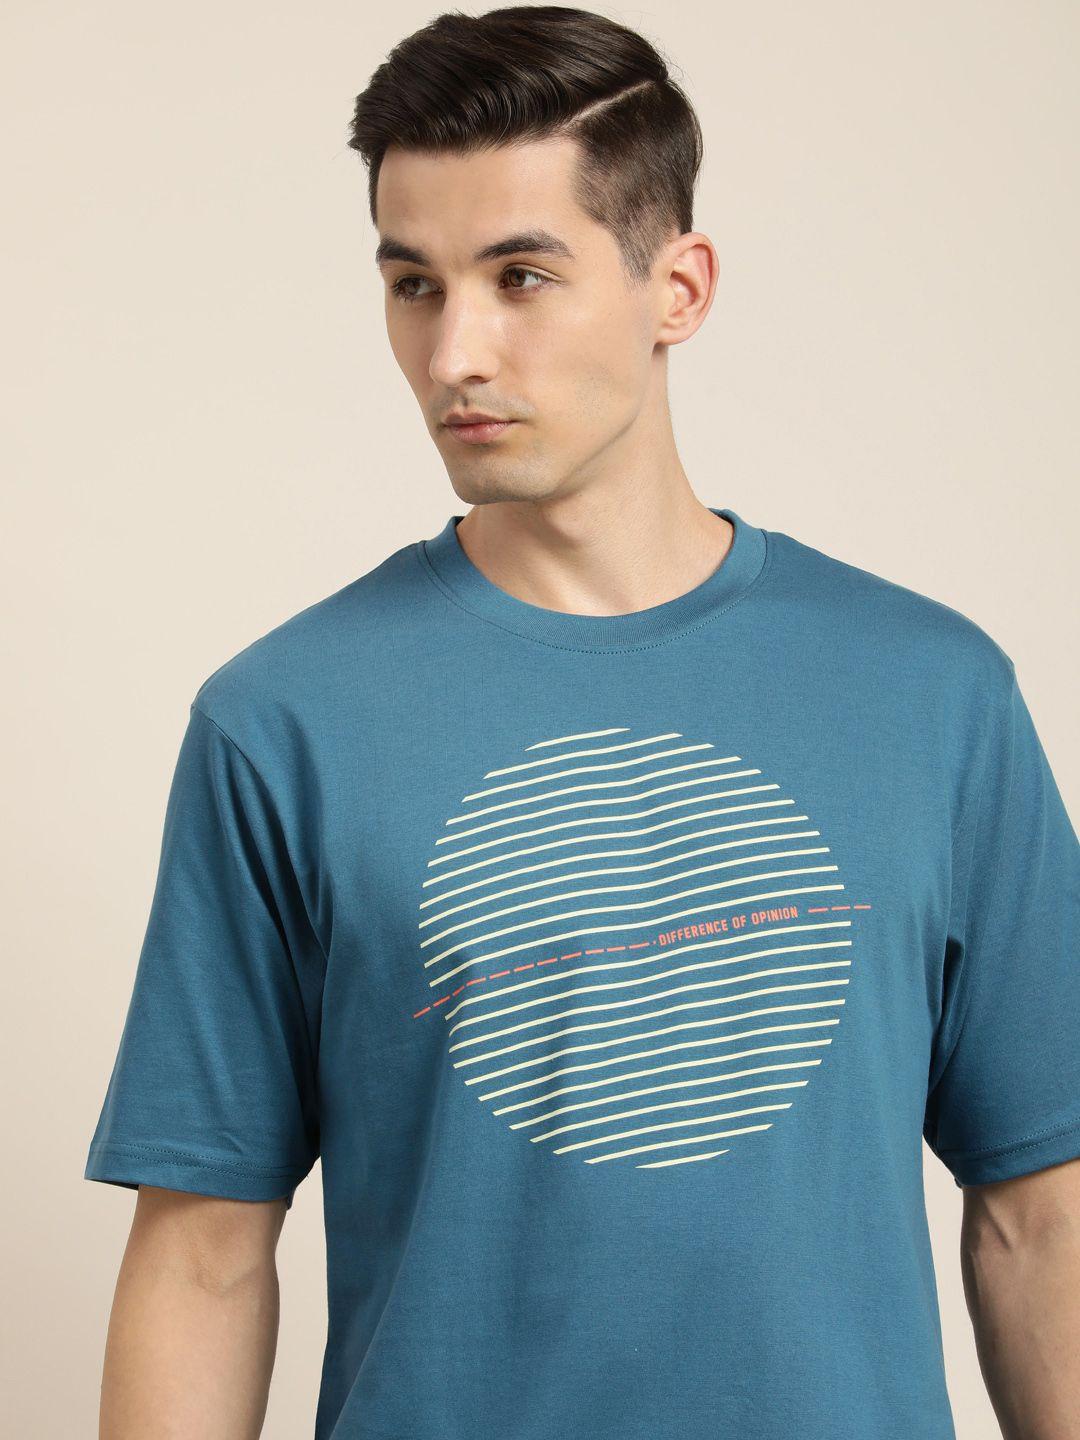 difference of opinion men teal blue & off white geometric print oversized cotton t-shirt